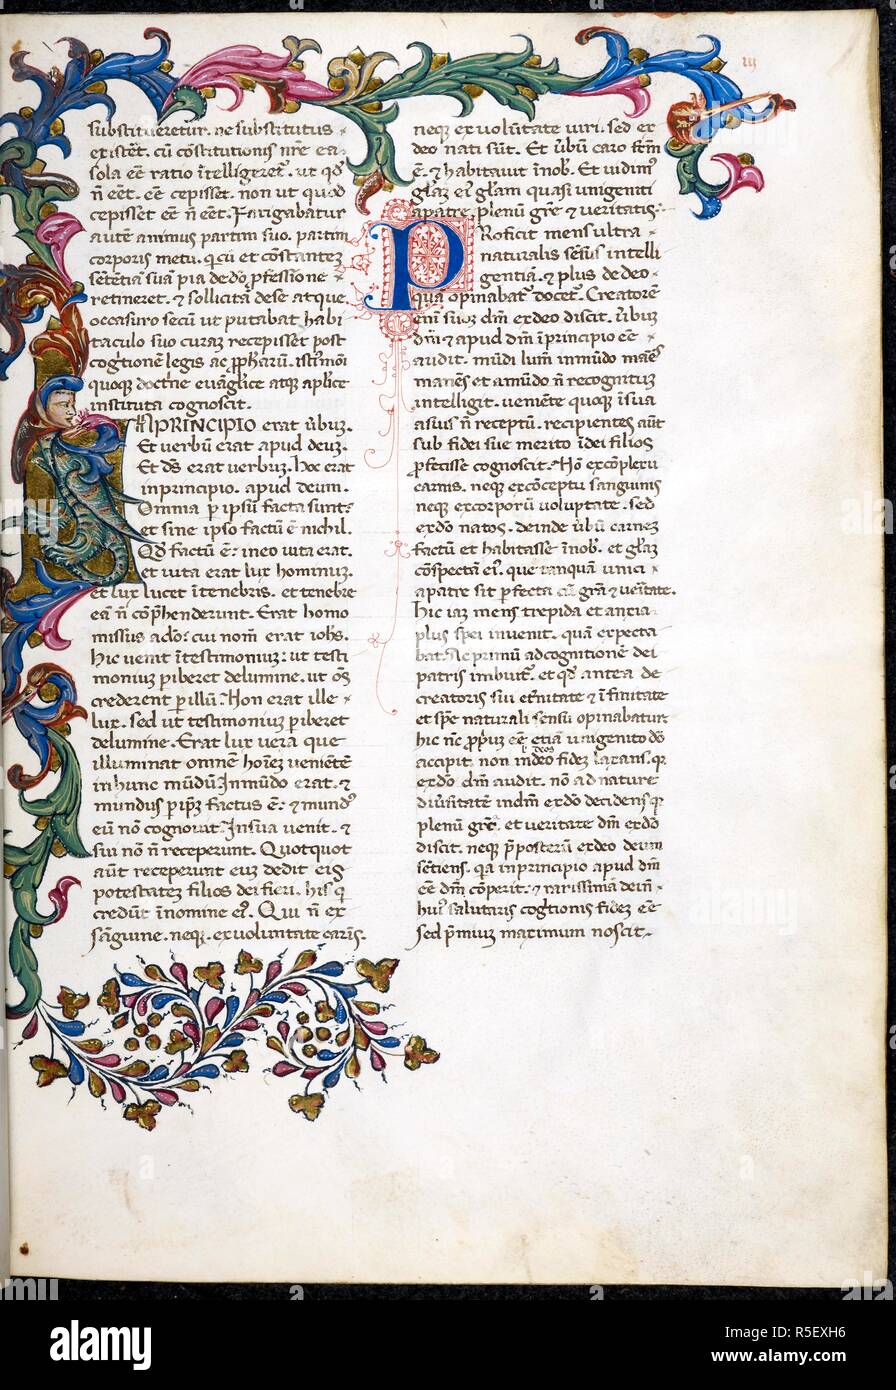 Historiated initial 'I'(n principio) in the shape of a hybrid creature, combined with a three-sided border foliate decoration including acanthus leaves. De Trinitate. Italy, Central (Florence); 1st quarter of the 15th century. Source: Harley 4949, f.3. Language: Latin. Stock Photo